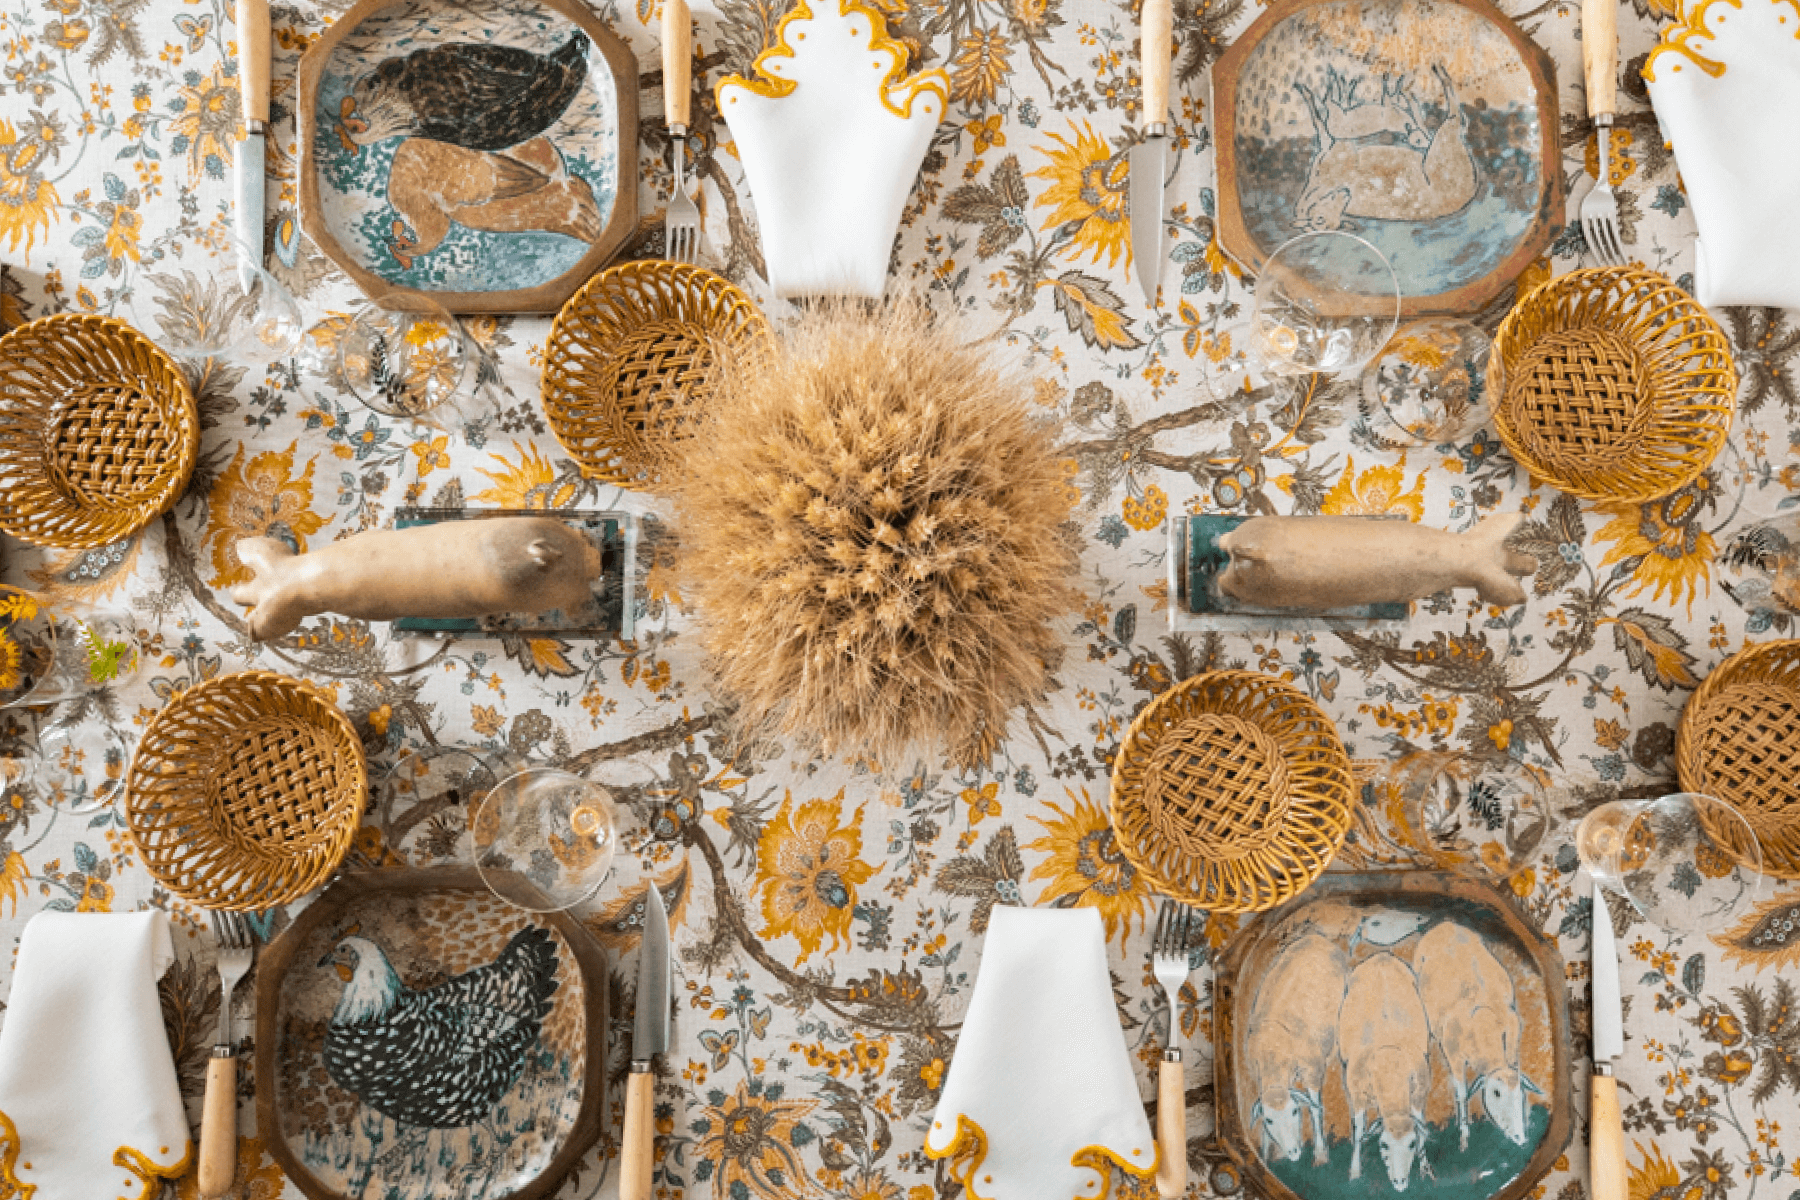 Wide crop of a dinner table set with a yellow floral tablecloth, ceramic plates featuring farm animal designs, straw baskets, and wheat accents. 